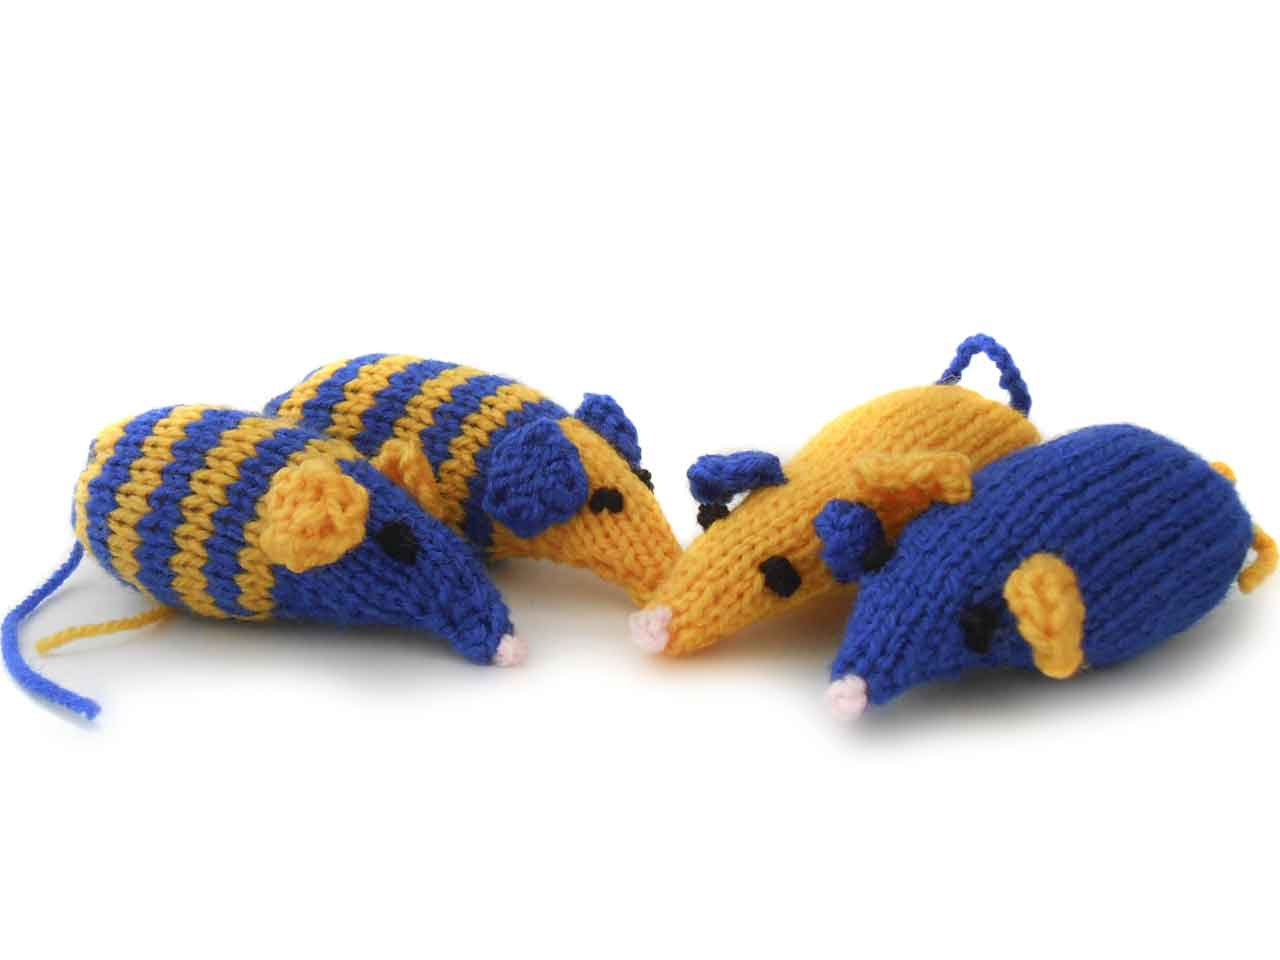 Knitting Patterns For Cat Toys Knitted Catnip Mice Saga